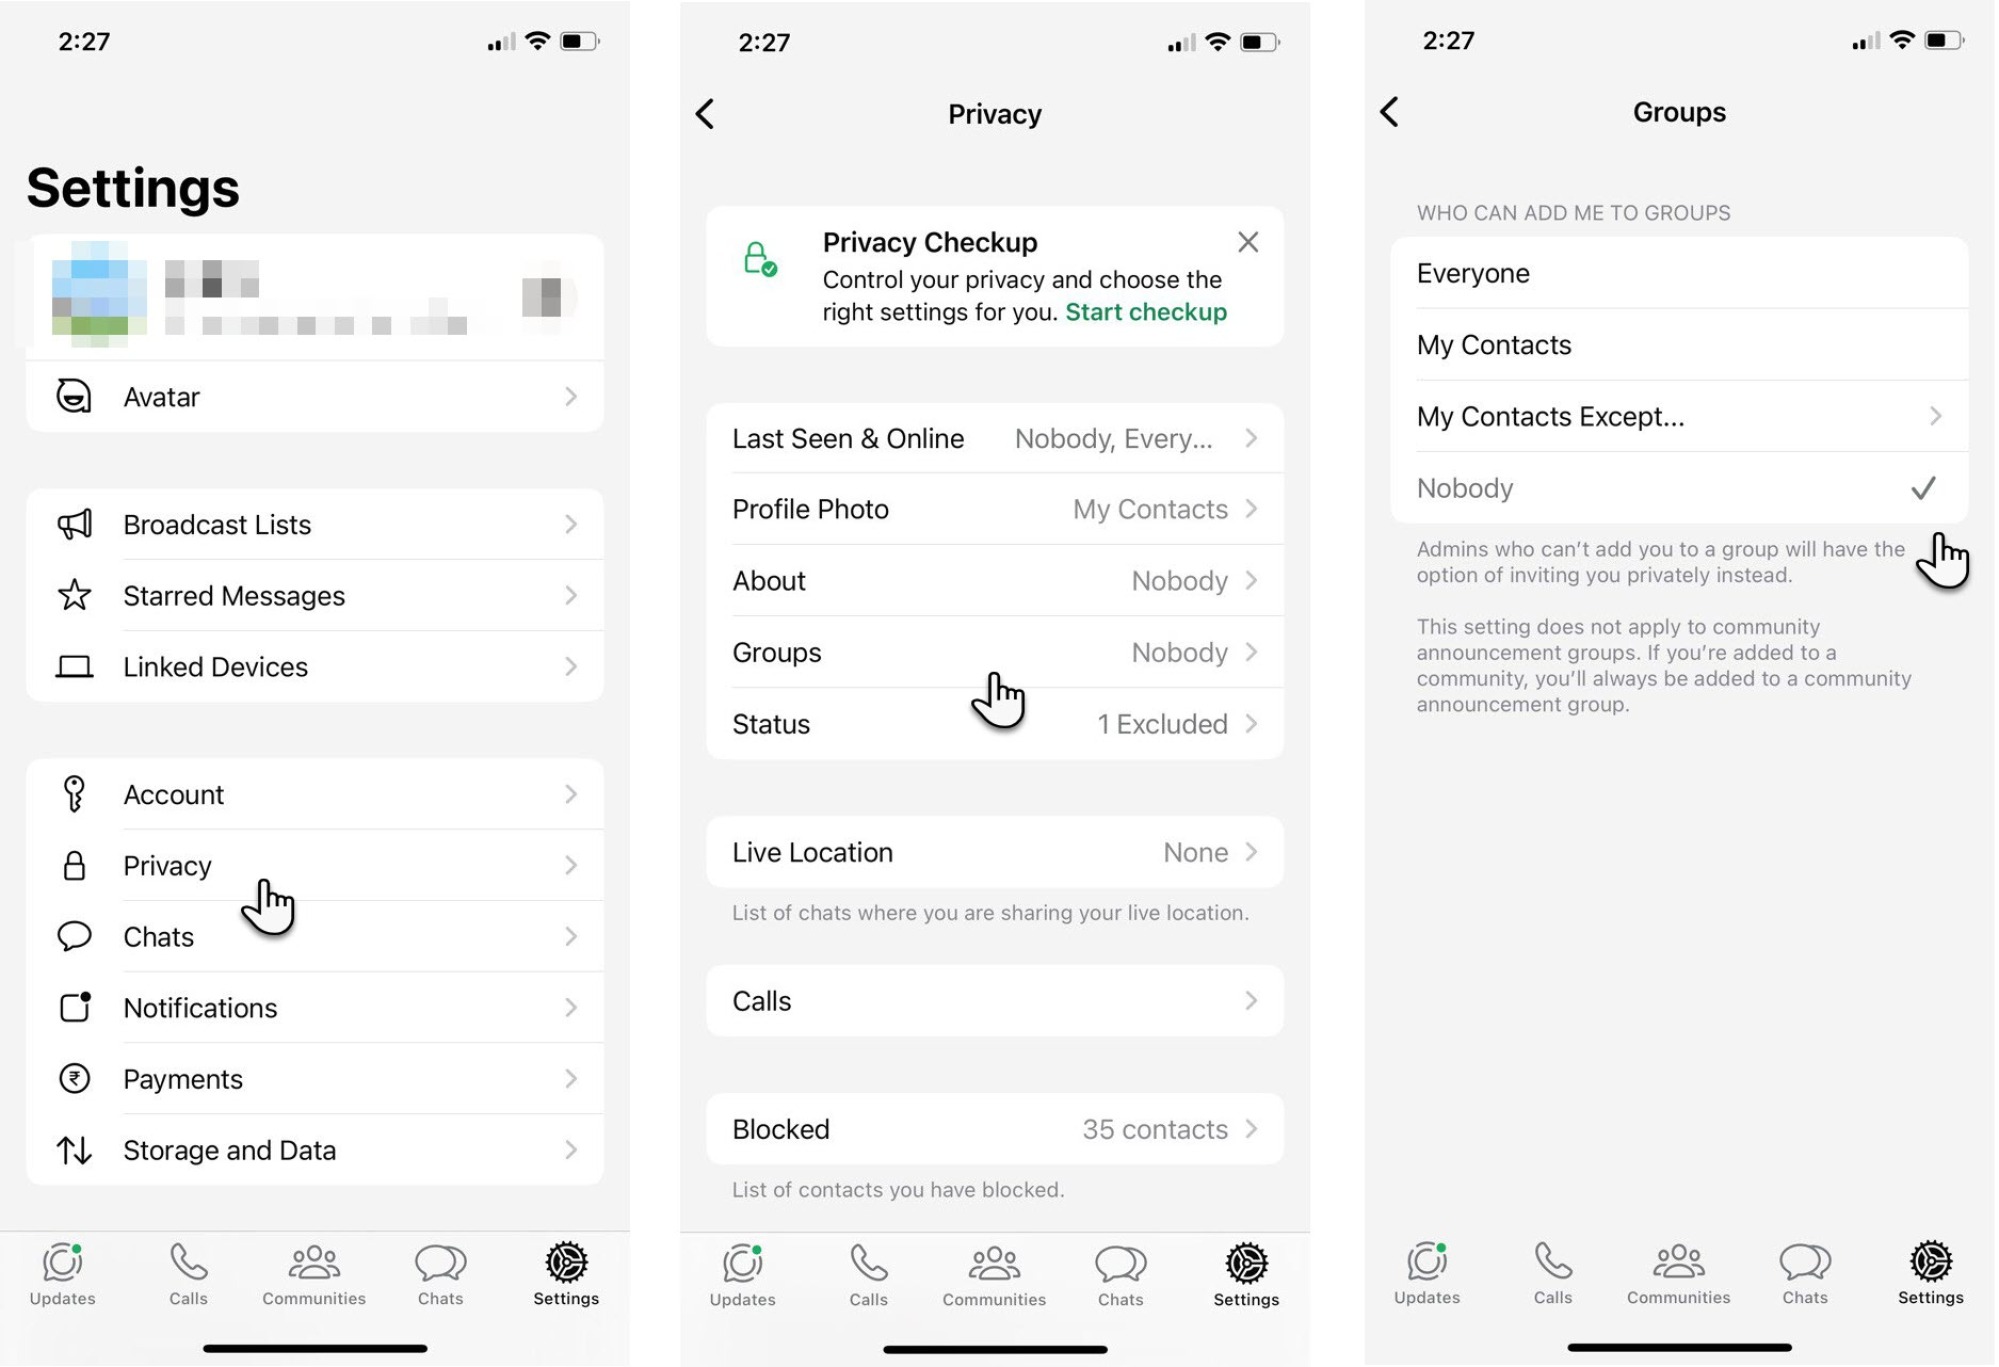 WhatsApp for iOS group privacy settings showng the "Nobody" option